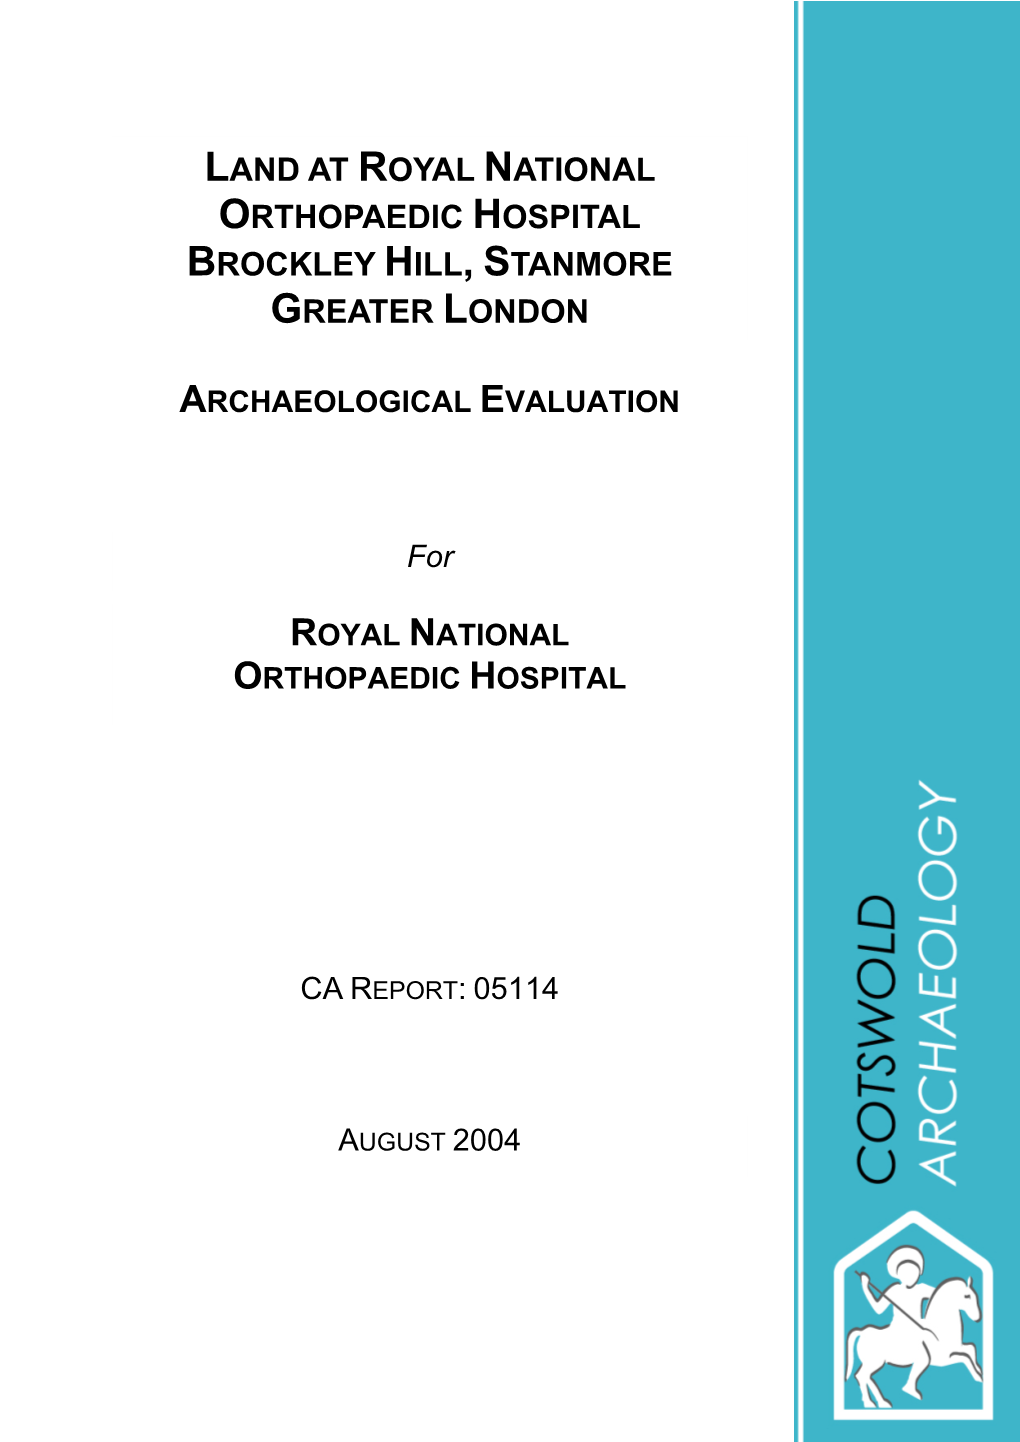 Land at Royal National Orthopaedic Hospital Brockley Hill, Stanmore Greater London